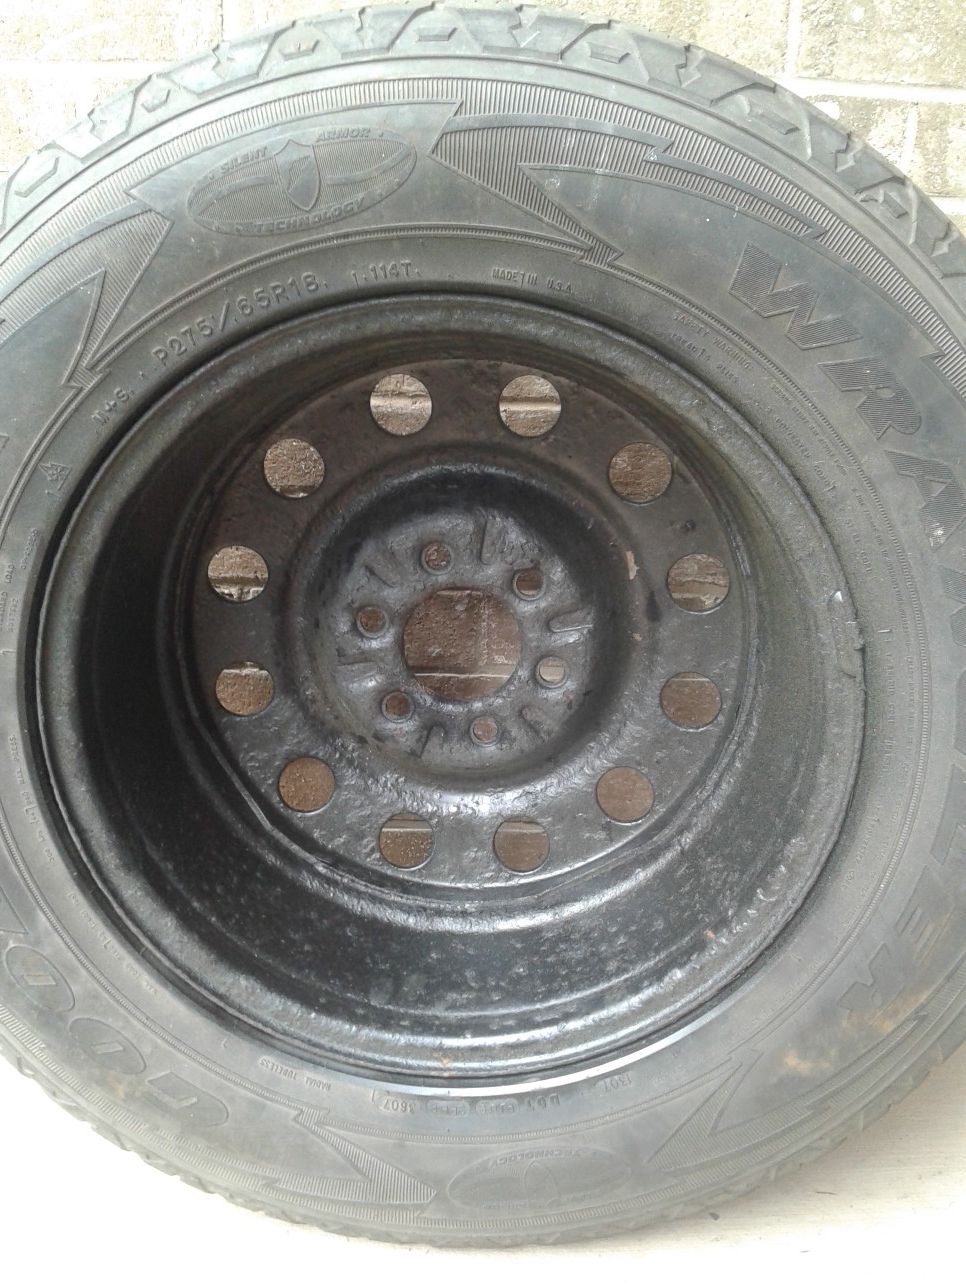 Truck Spare 6 lugs.   READ POST